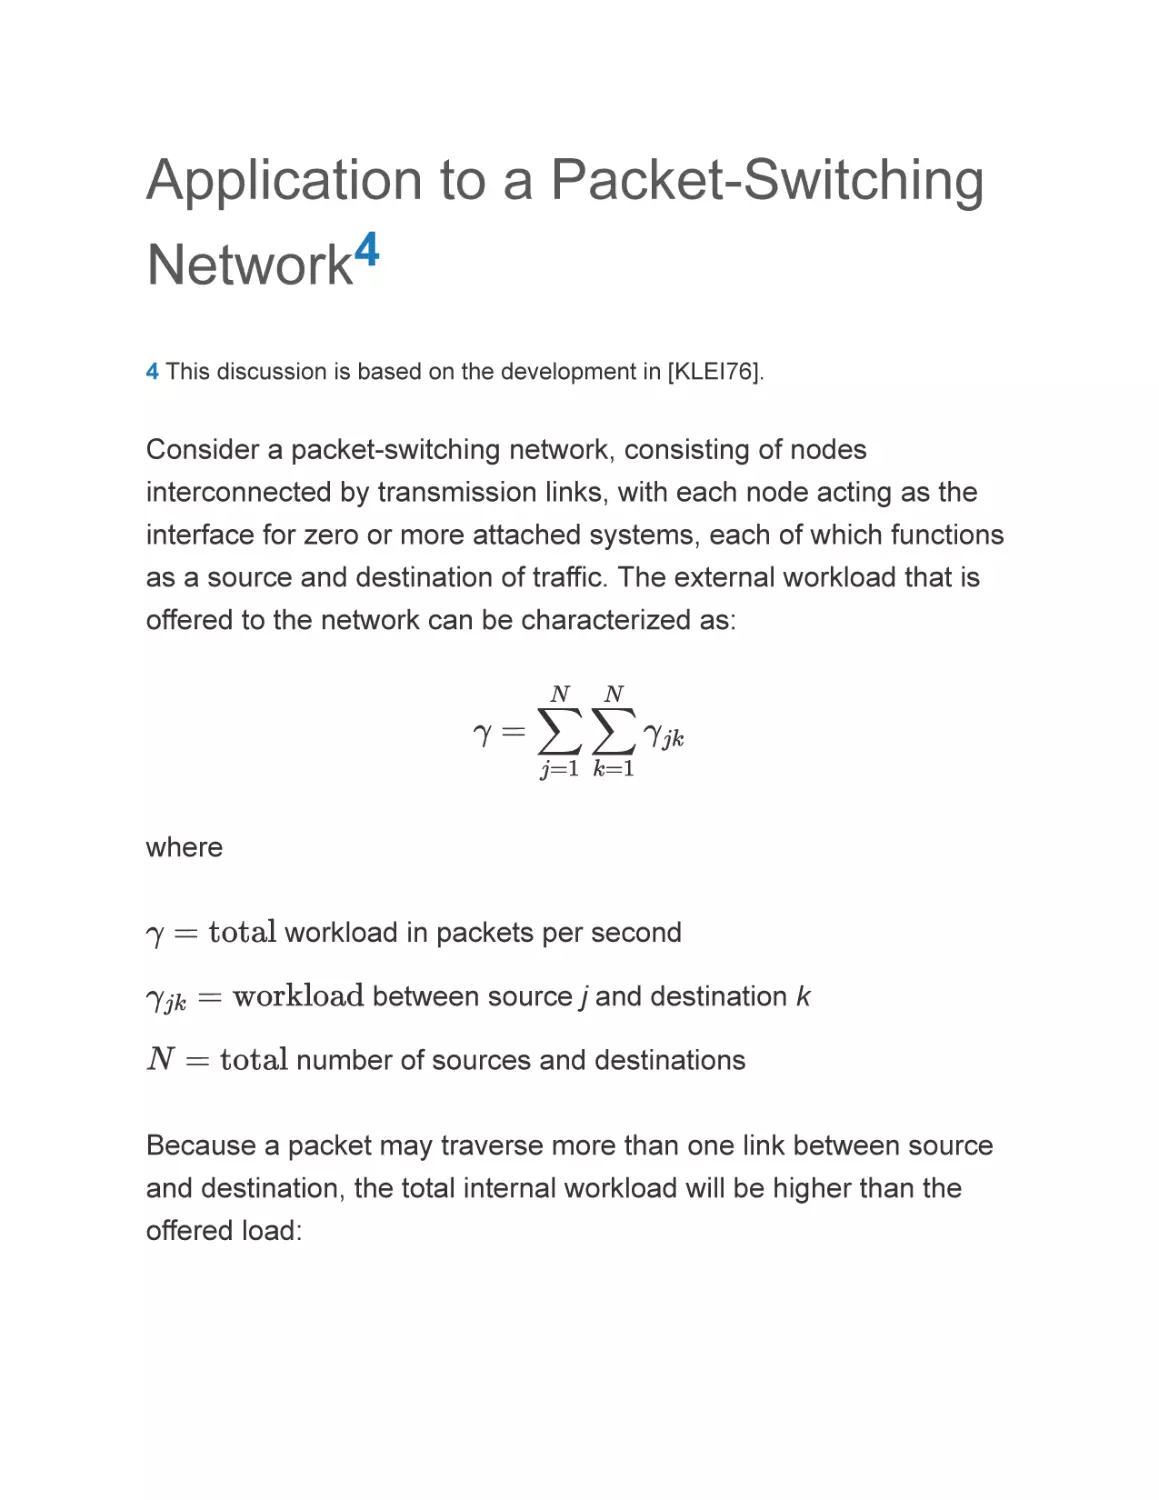 Application to a Packet-Switching Network4